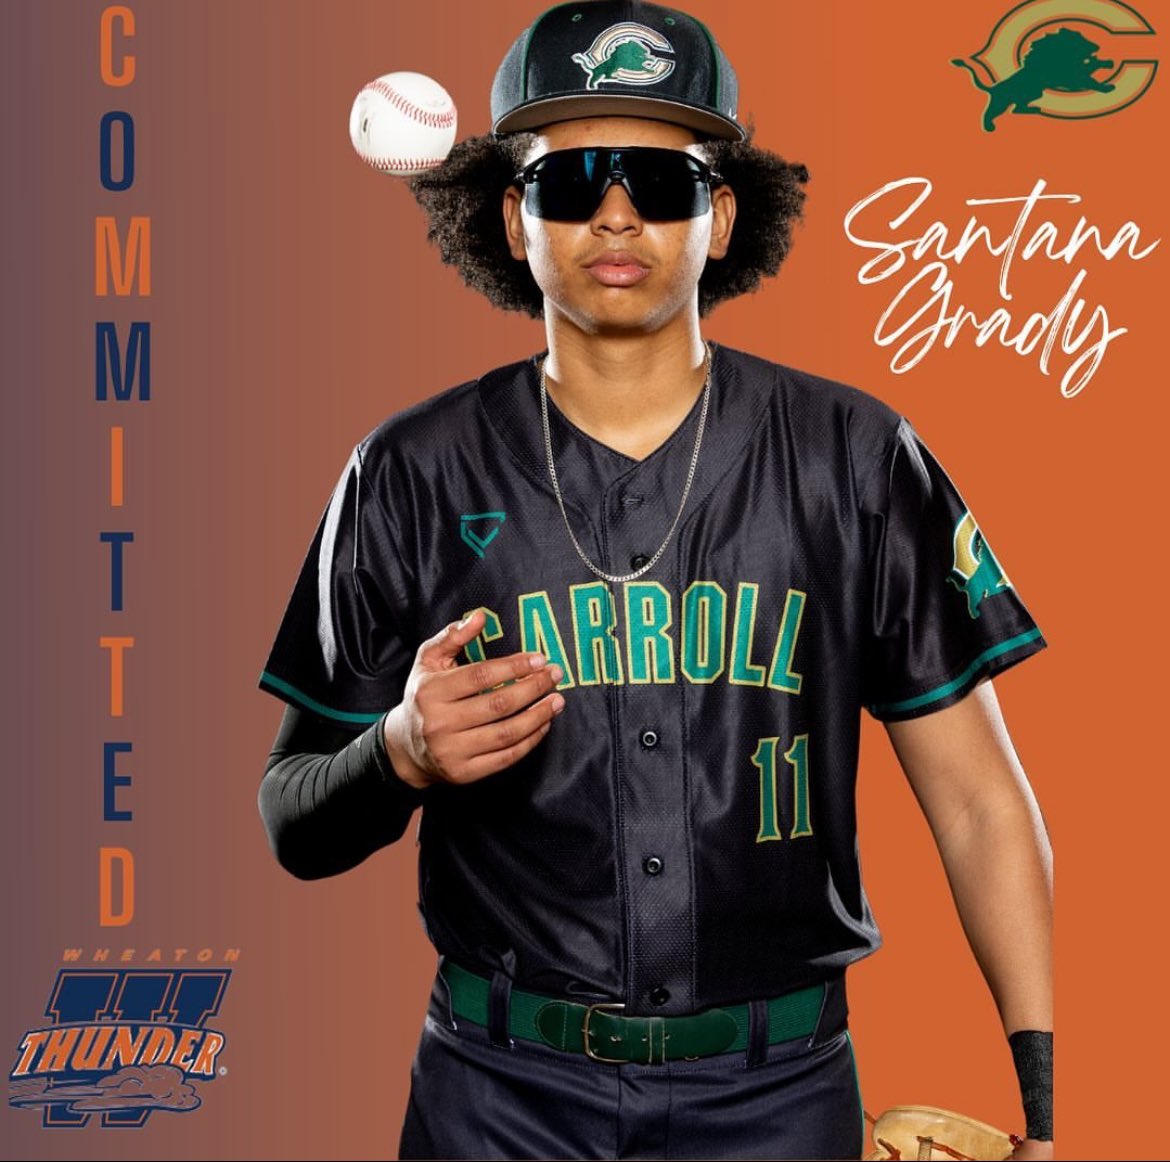 Congratulations to another one of #CoachGravesGuys @santana_gr14 on his commitment to continue his academic and athletic career with @WCThunderBSBL